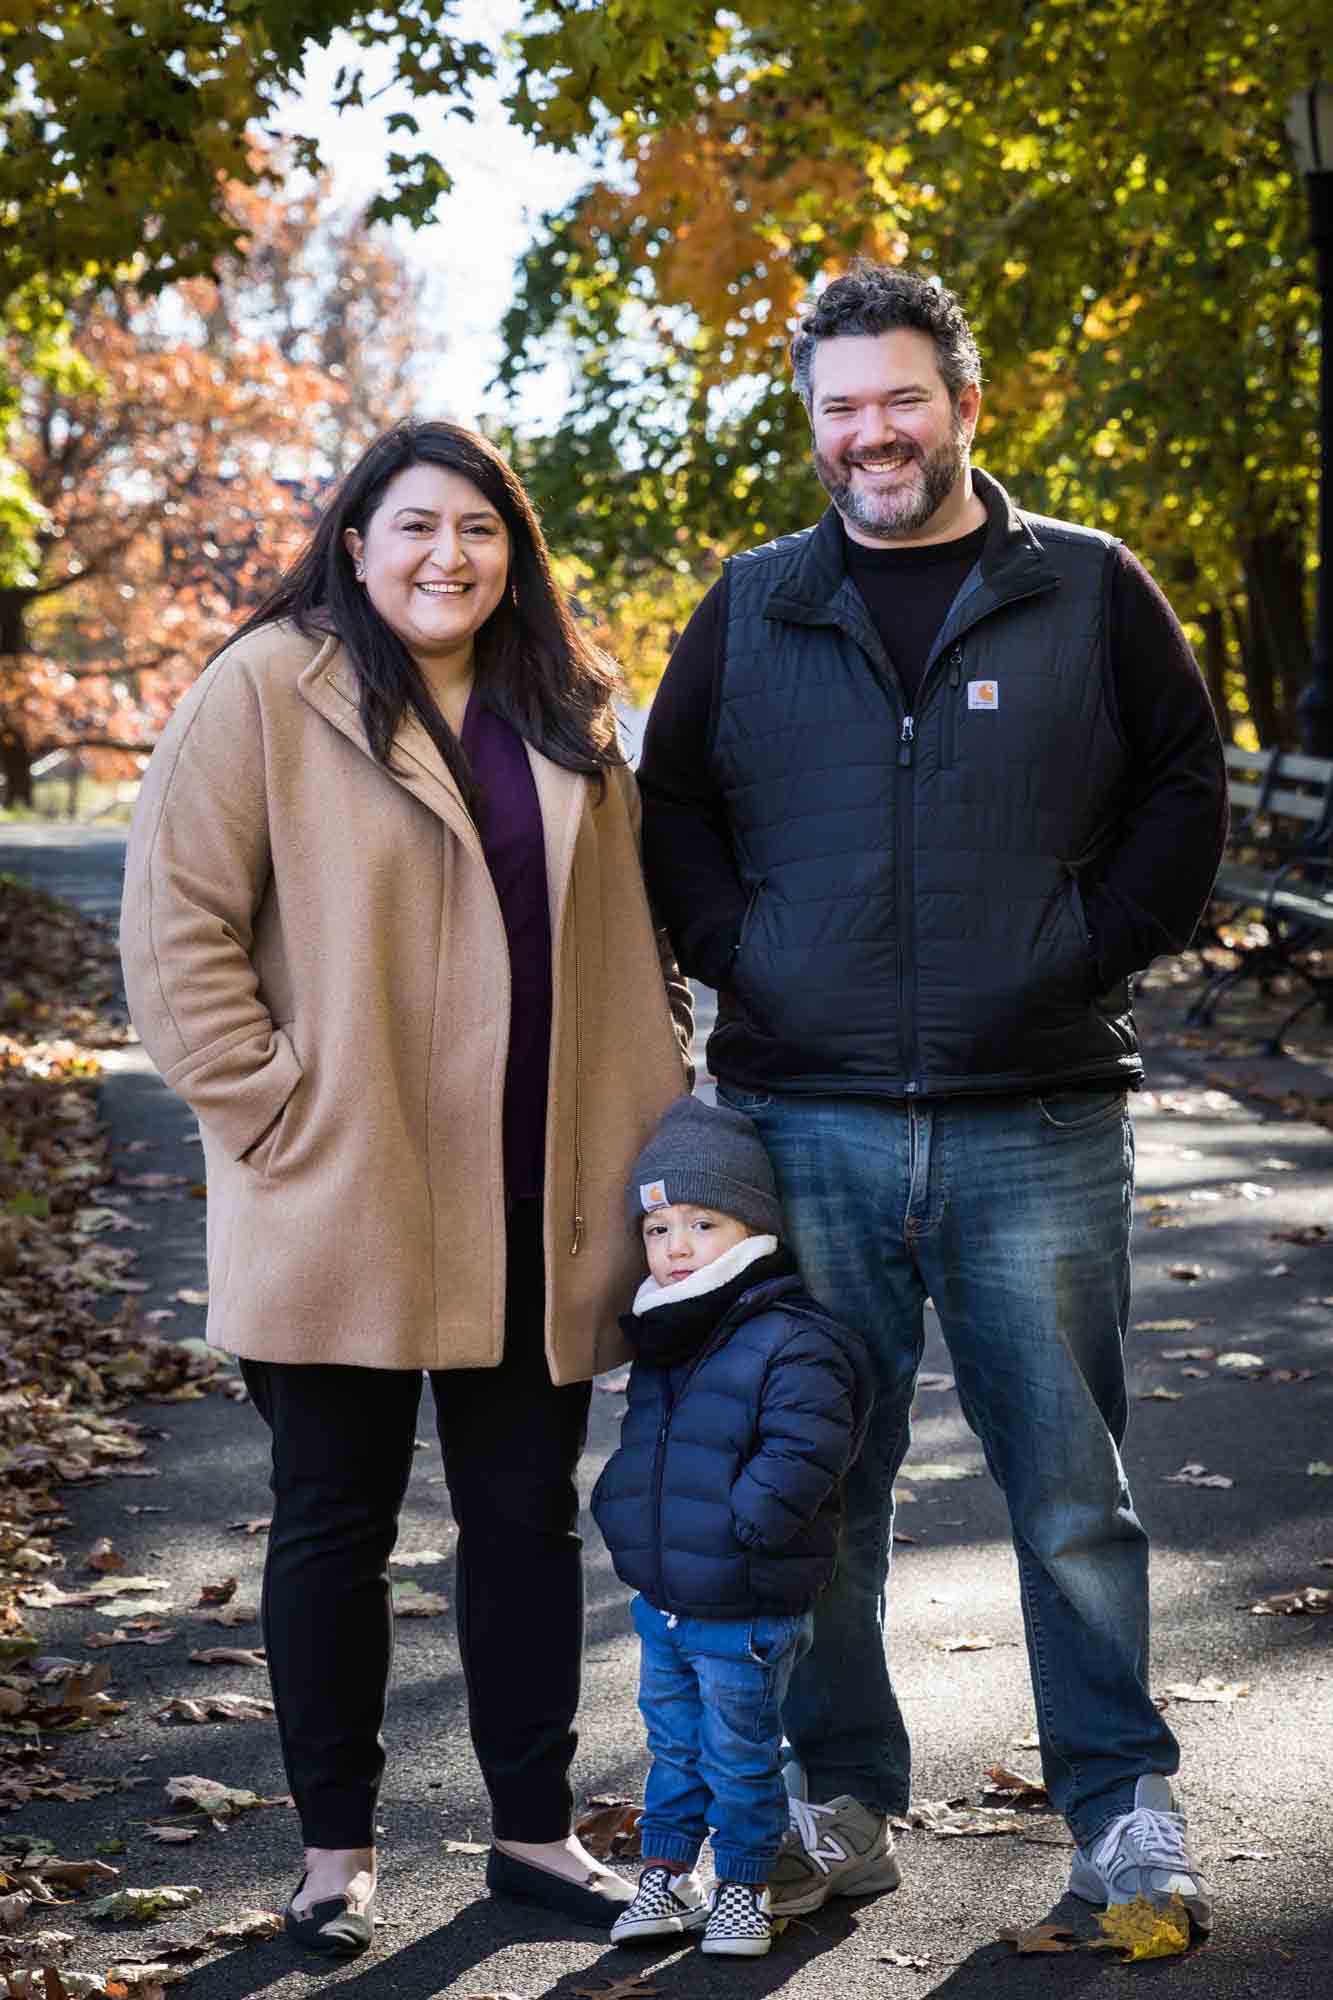 Parents and little boy posing for photo with hands in pockets